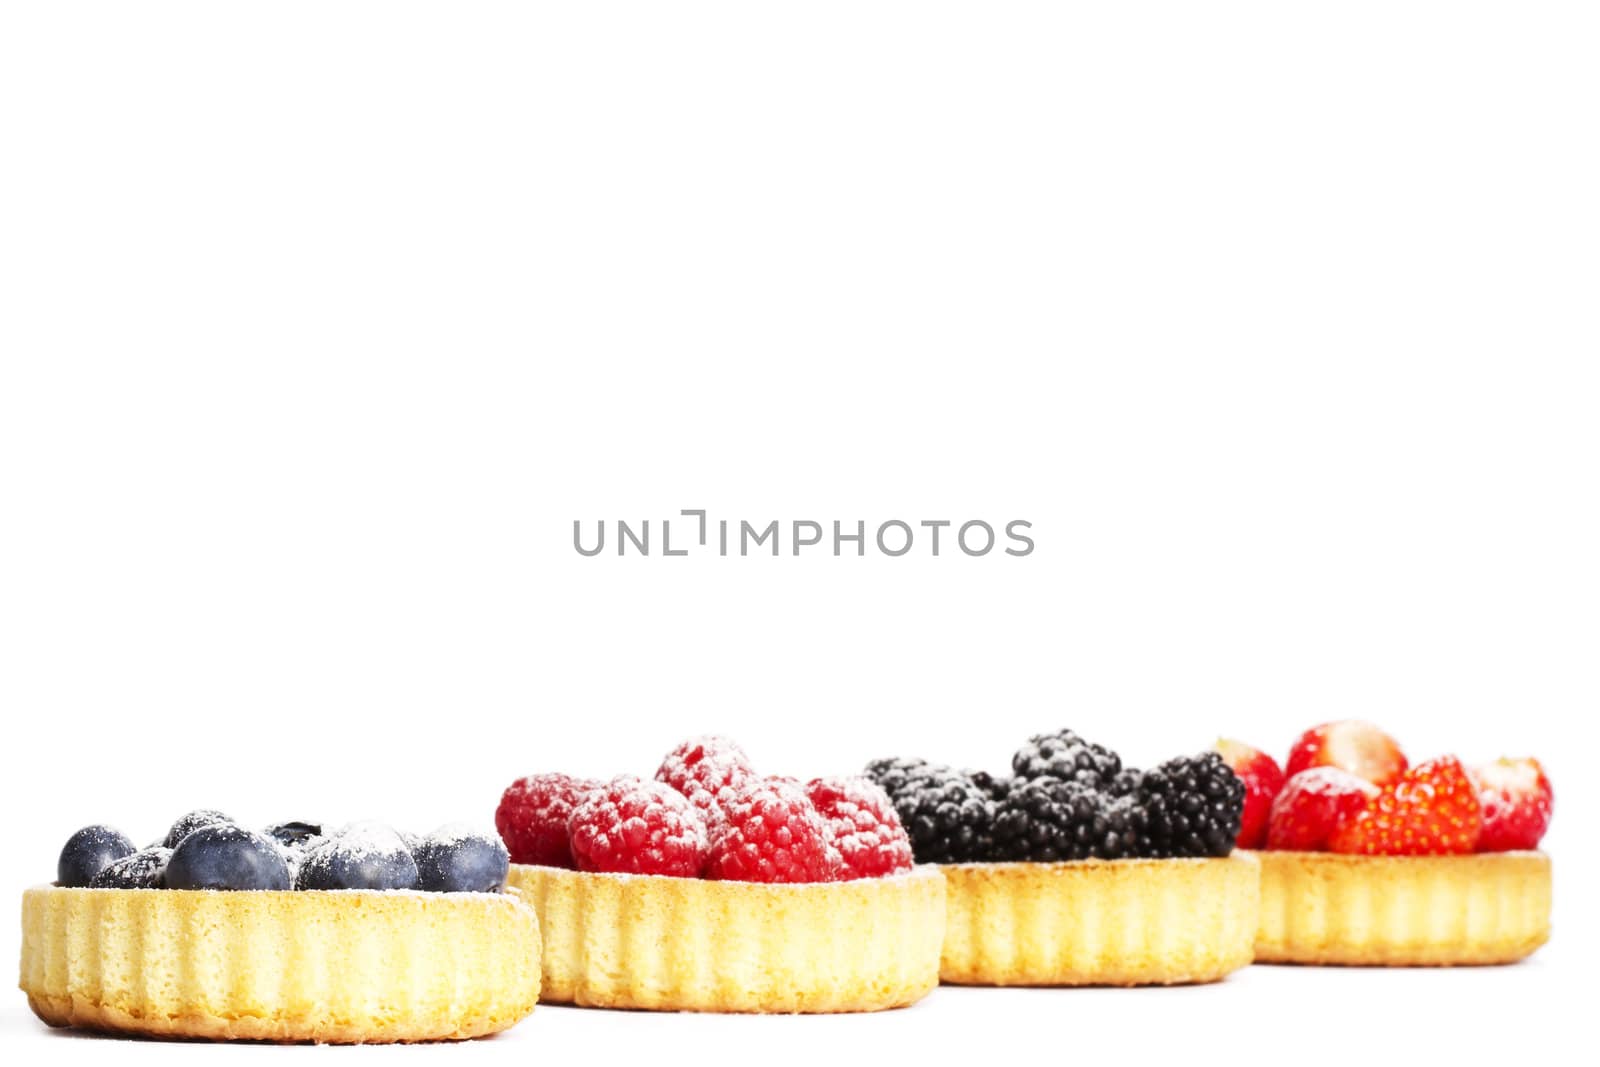 sugar coveres blueberries in front of wild berries in tartlets by RobStark